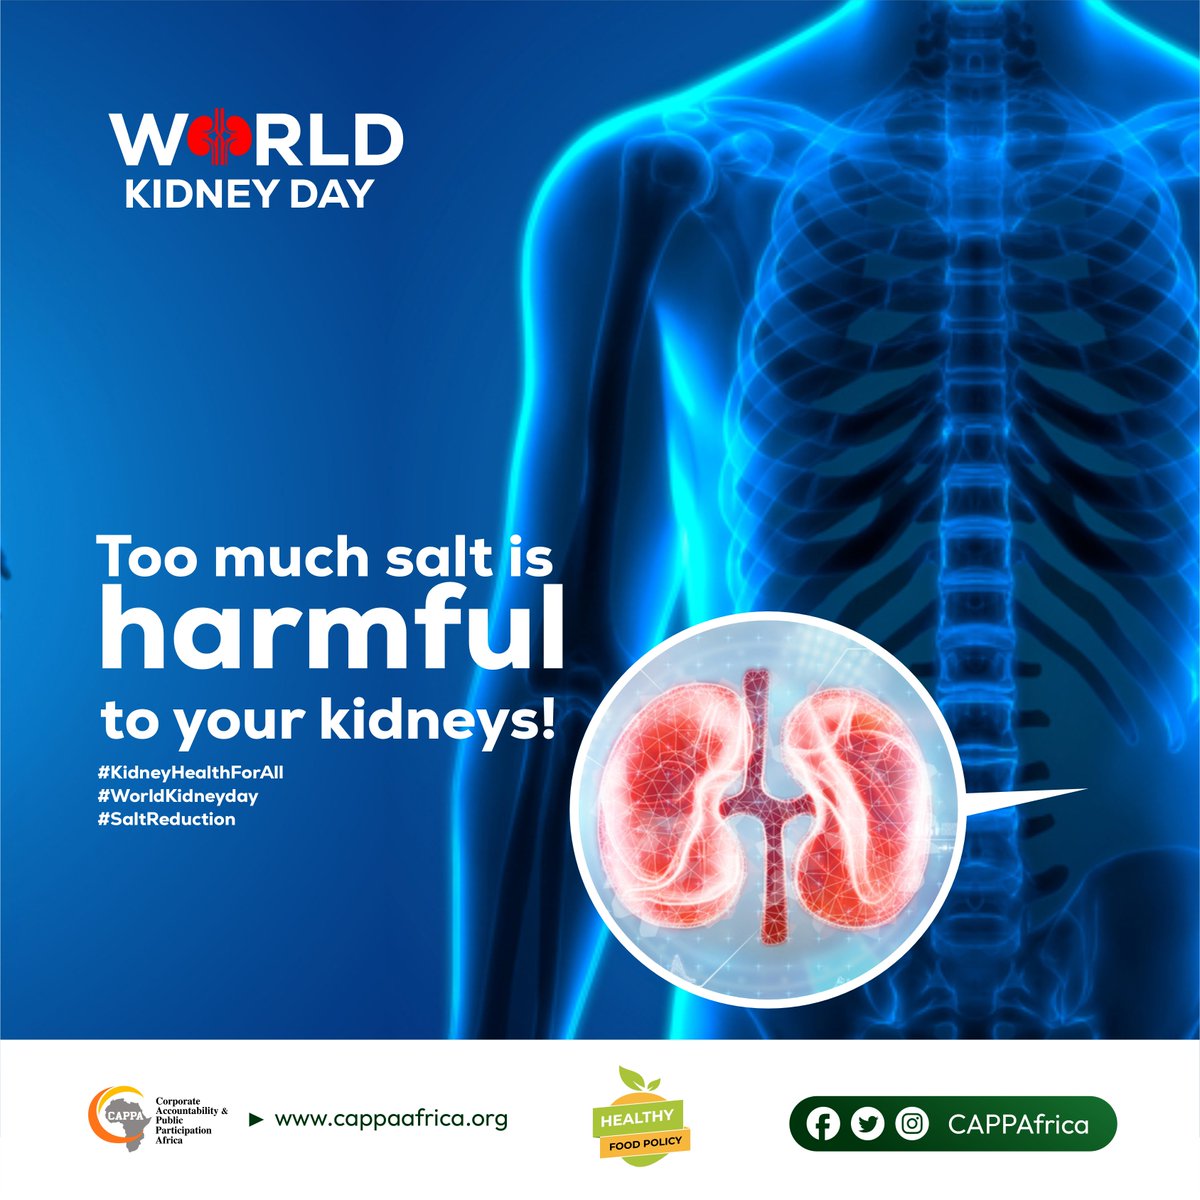 Today @CAPPA, we raise awareness about the impact of high salt intake on the kidneys and advocate for mandatory salt/sodium regulations for processed foods in Nigeria. #KidneyHealthForAll #WorldKidneyday #SaltReduction